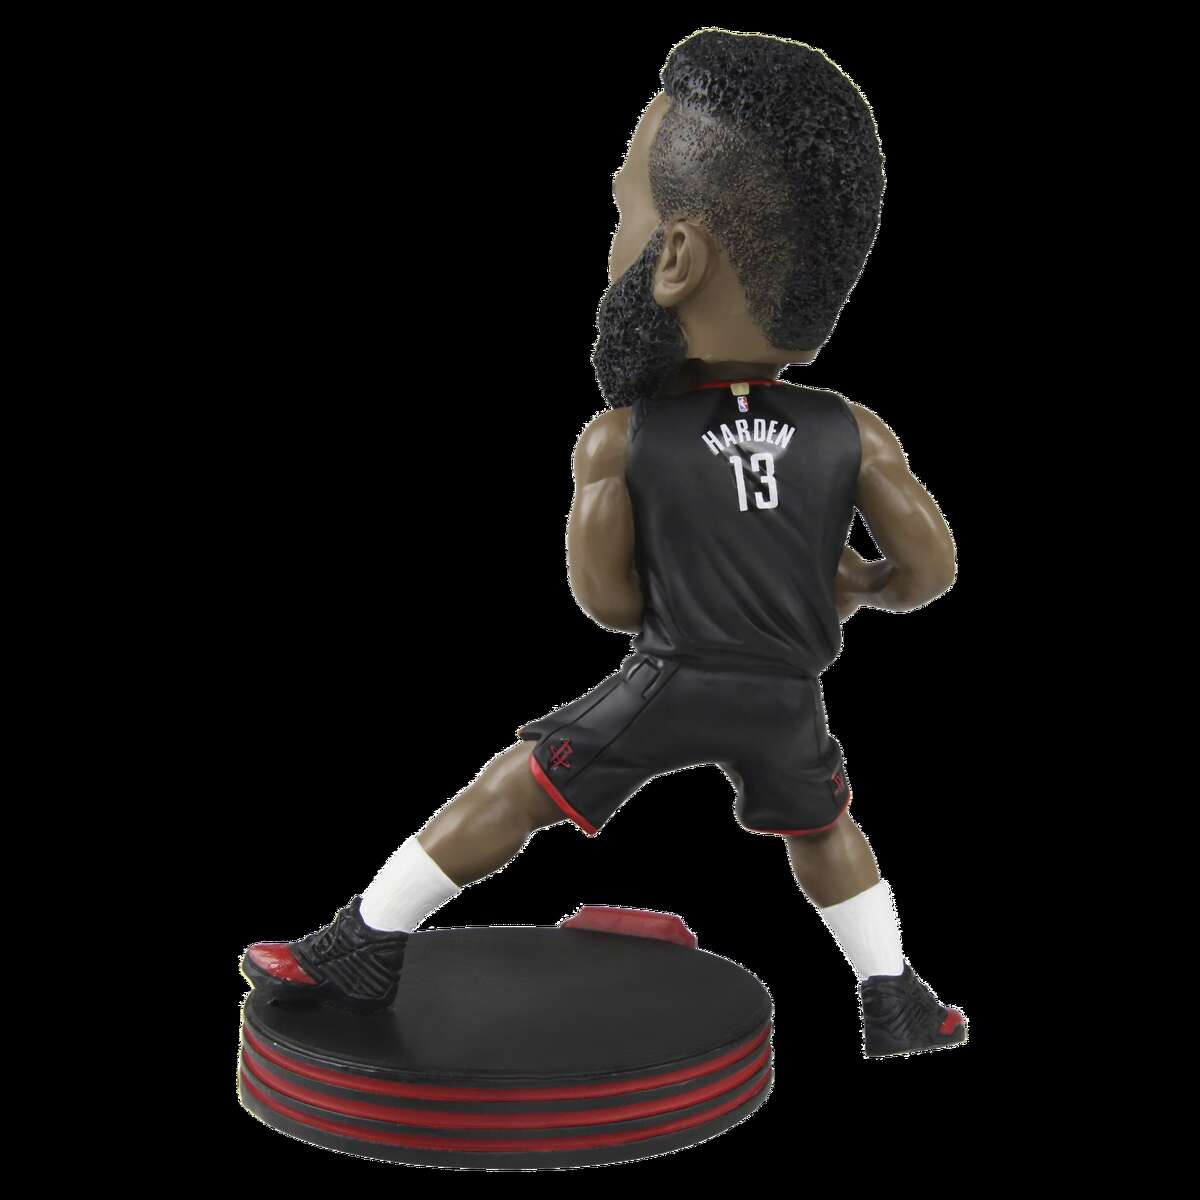 This limited edition James Harden bobblehead is only available through the National Bobblehead Hall of Fame website.